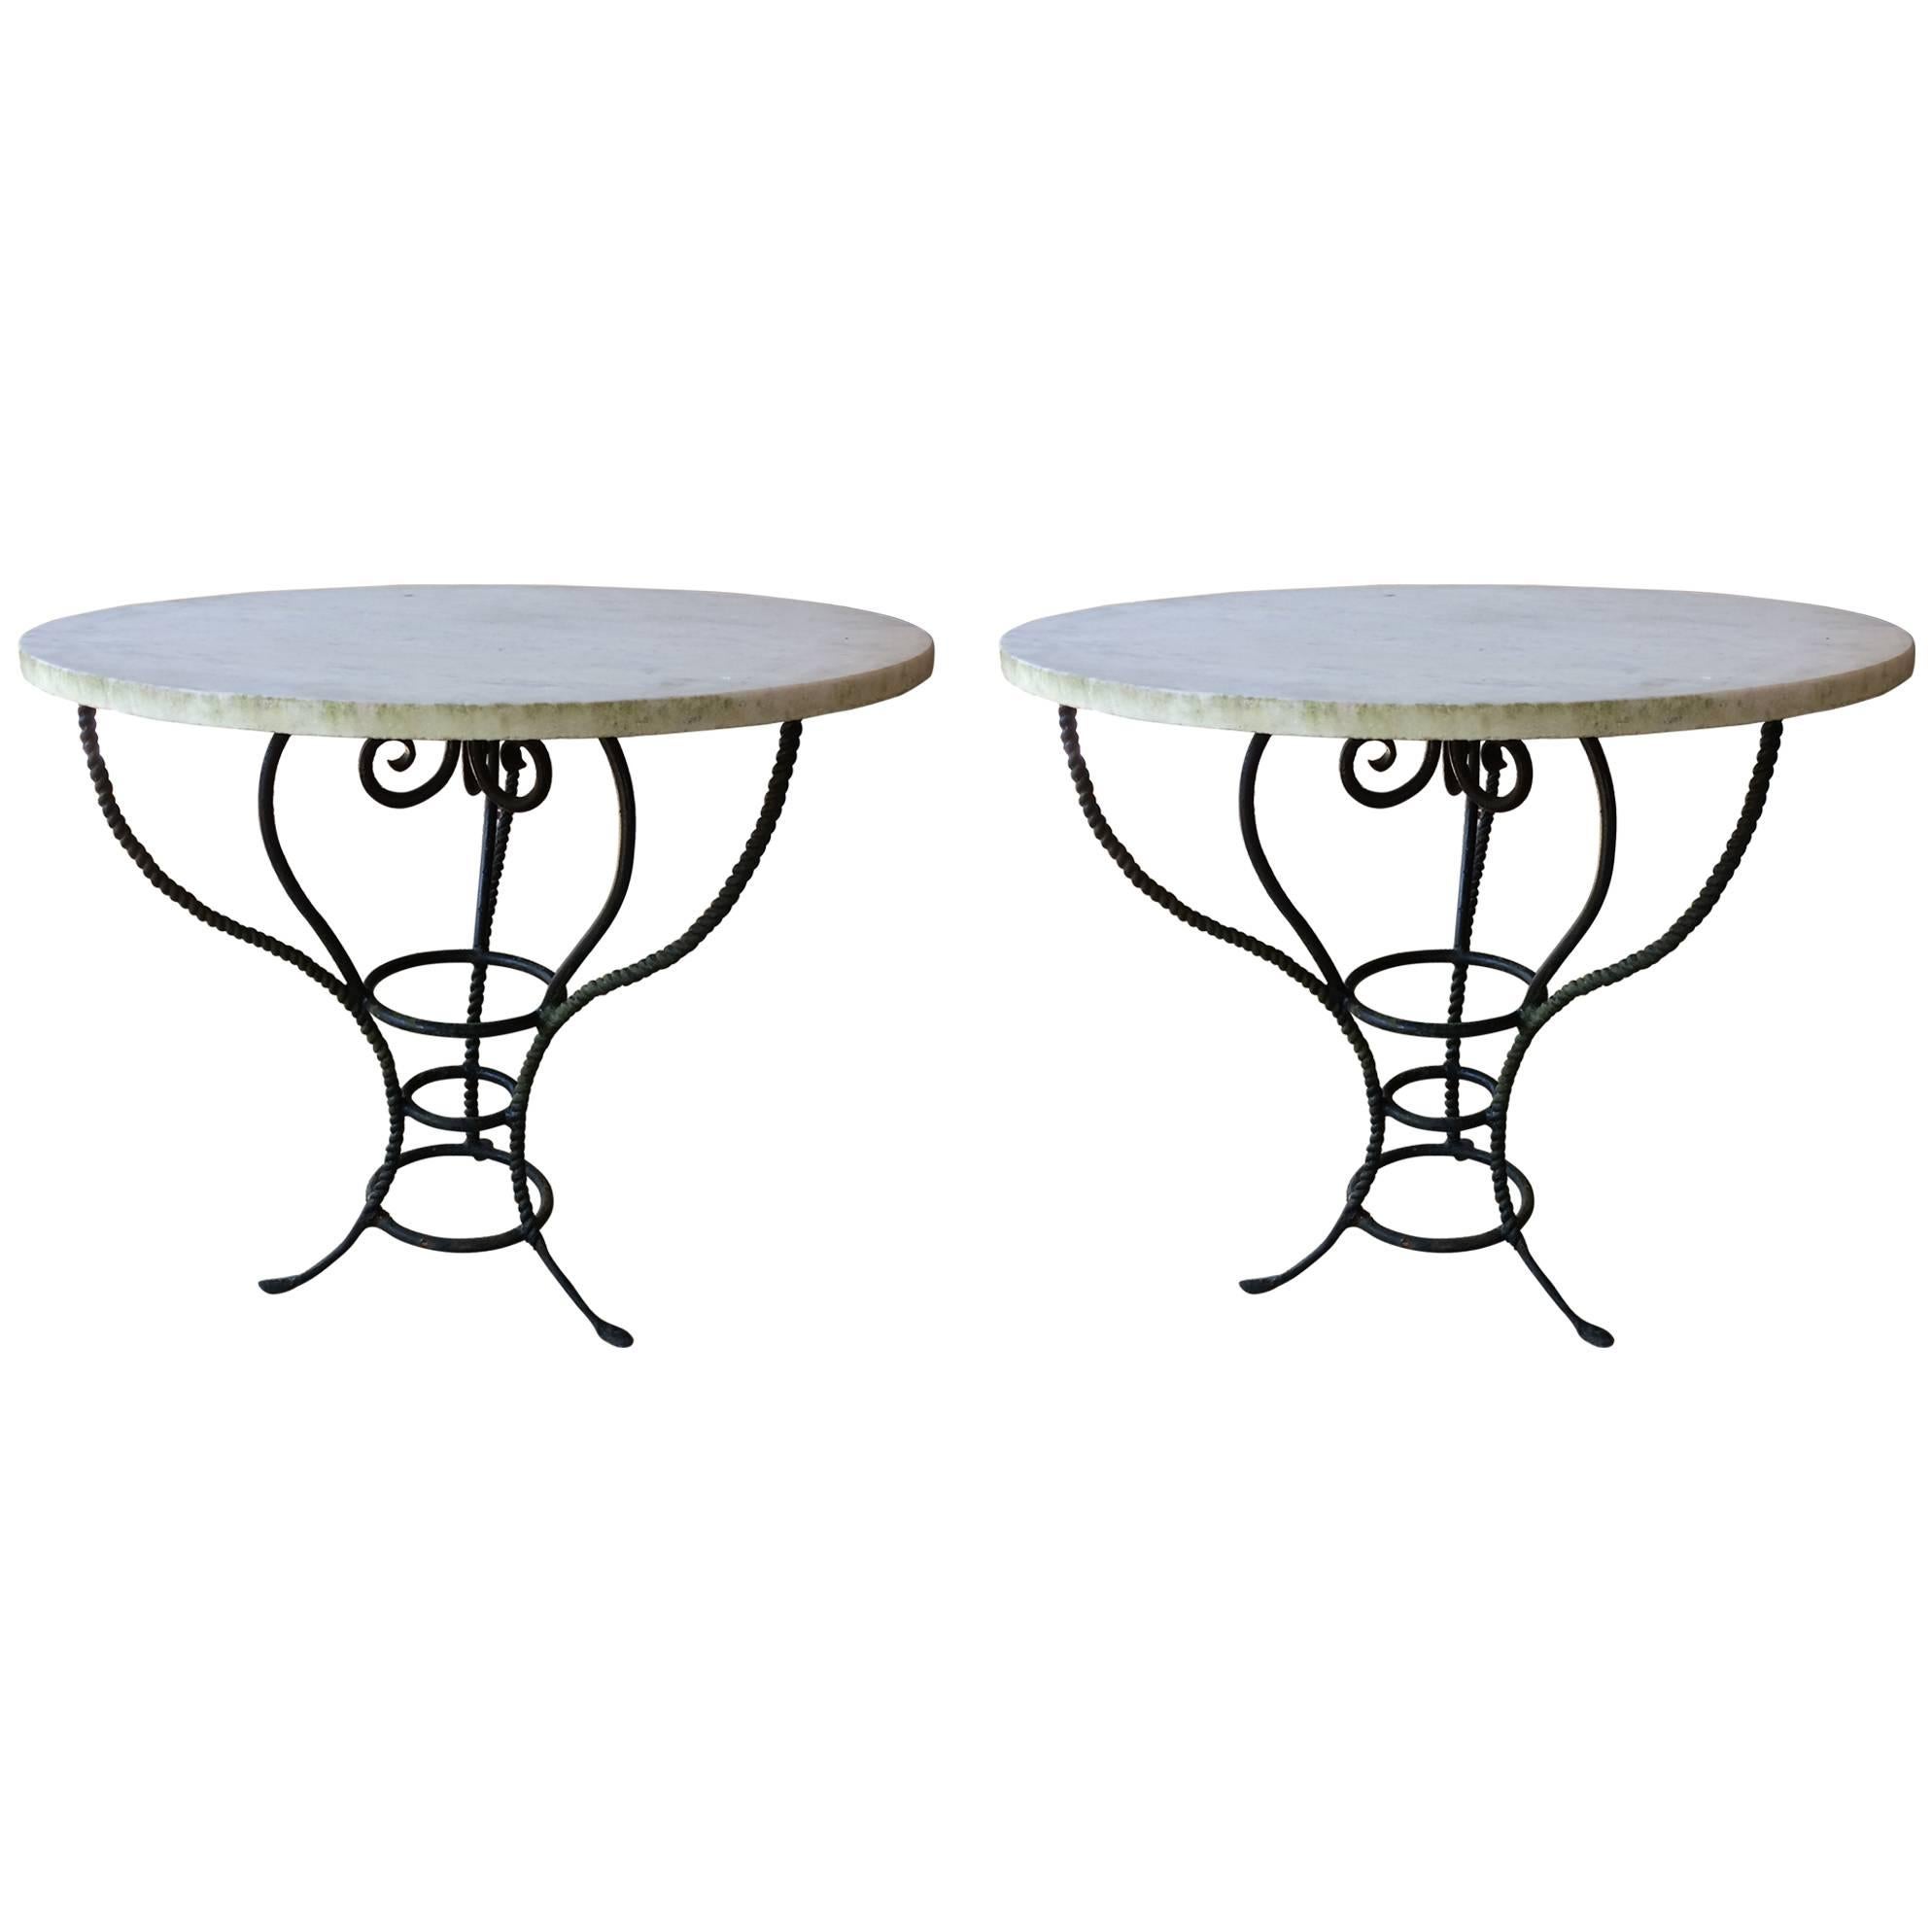 Great Looking Pair of Iron and Marble Side Tables